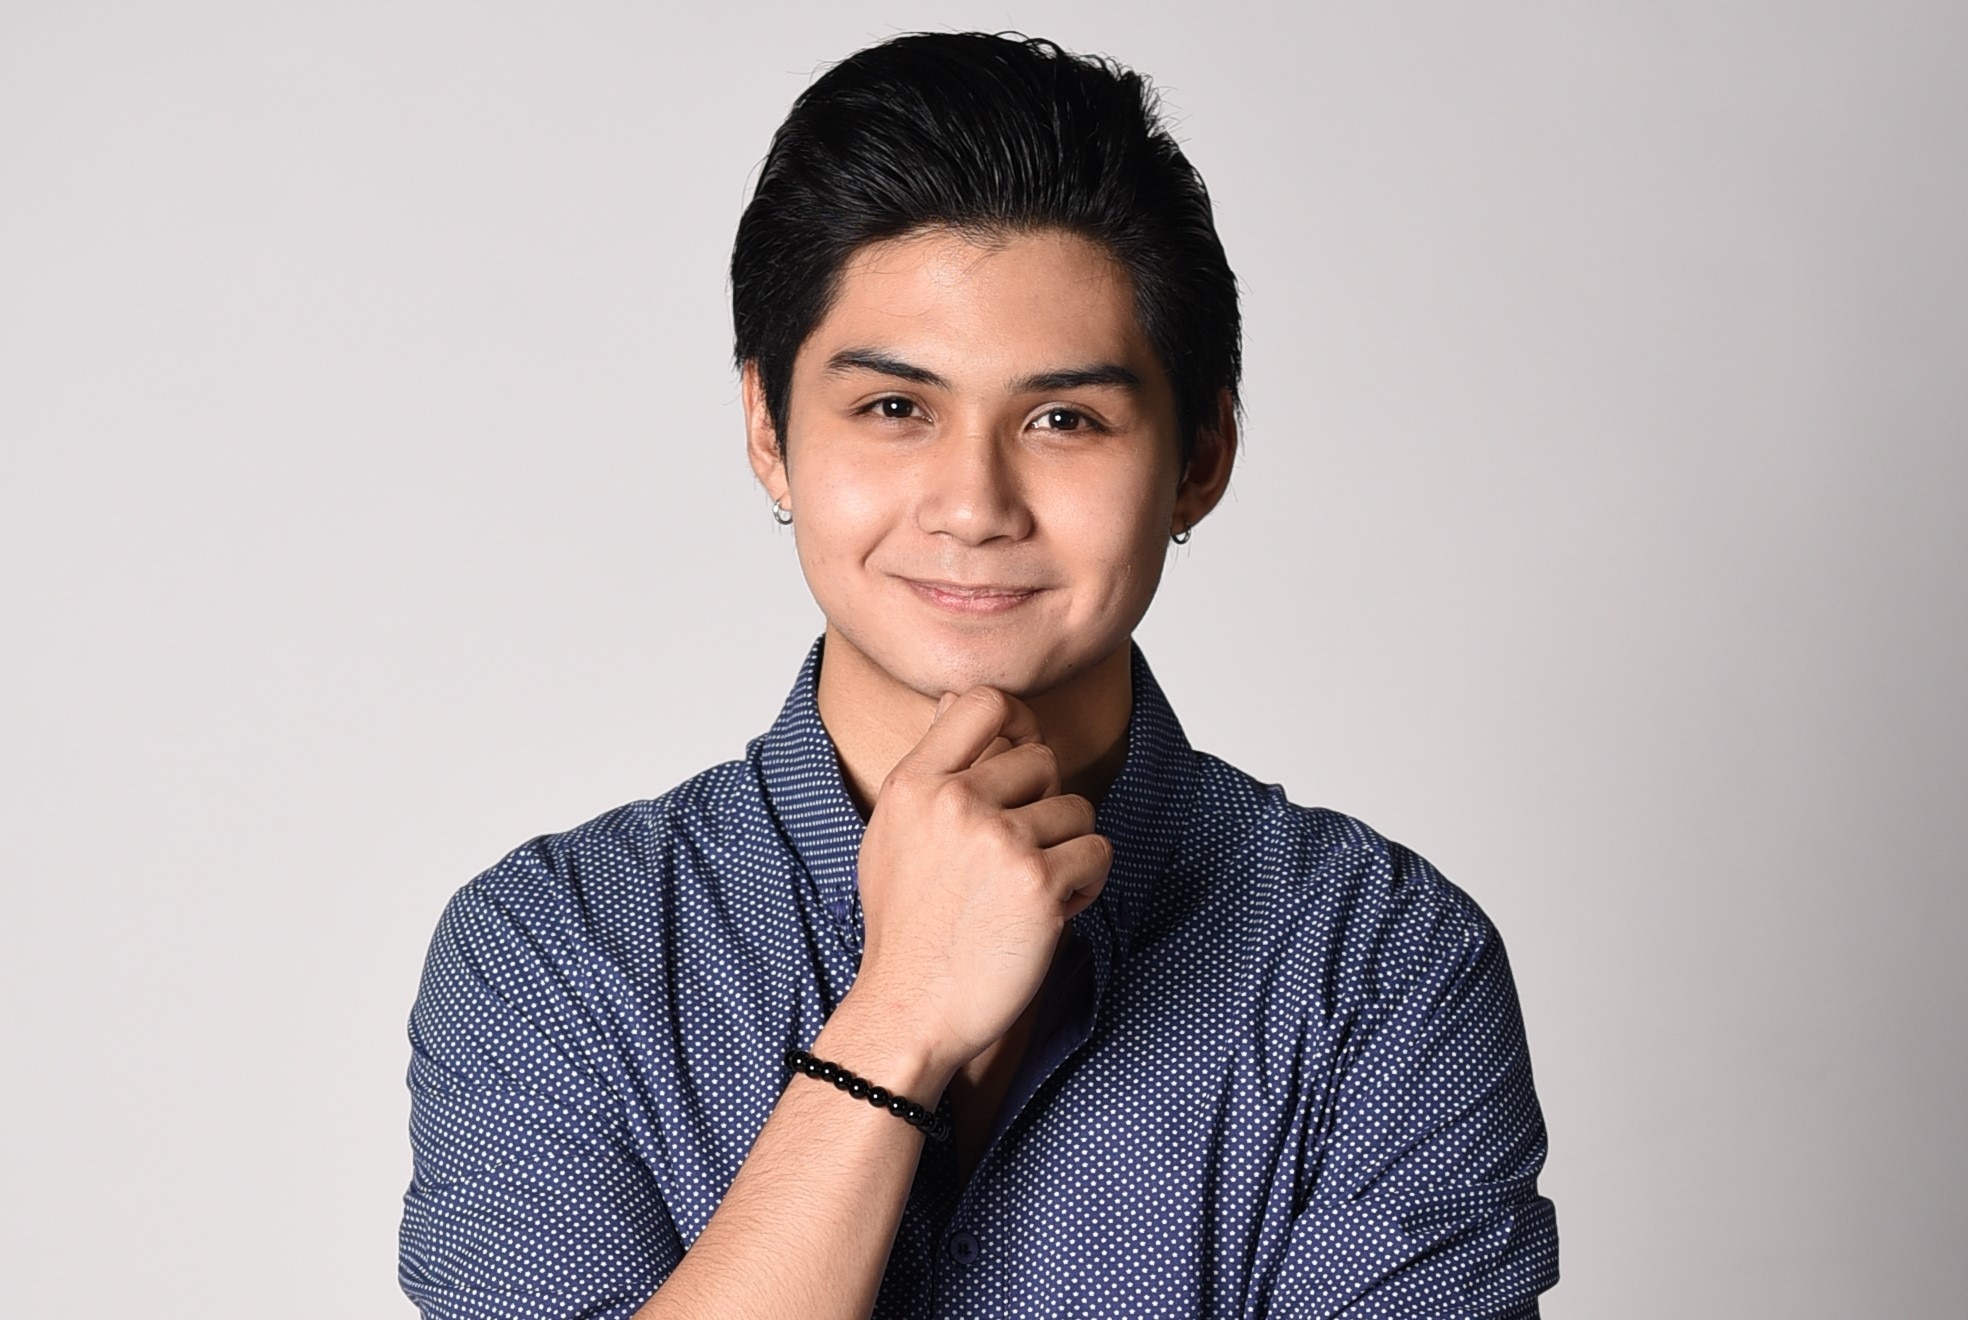 Ryle dabbles into music in debut single "Iniismol"